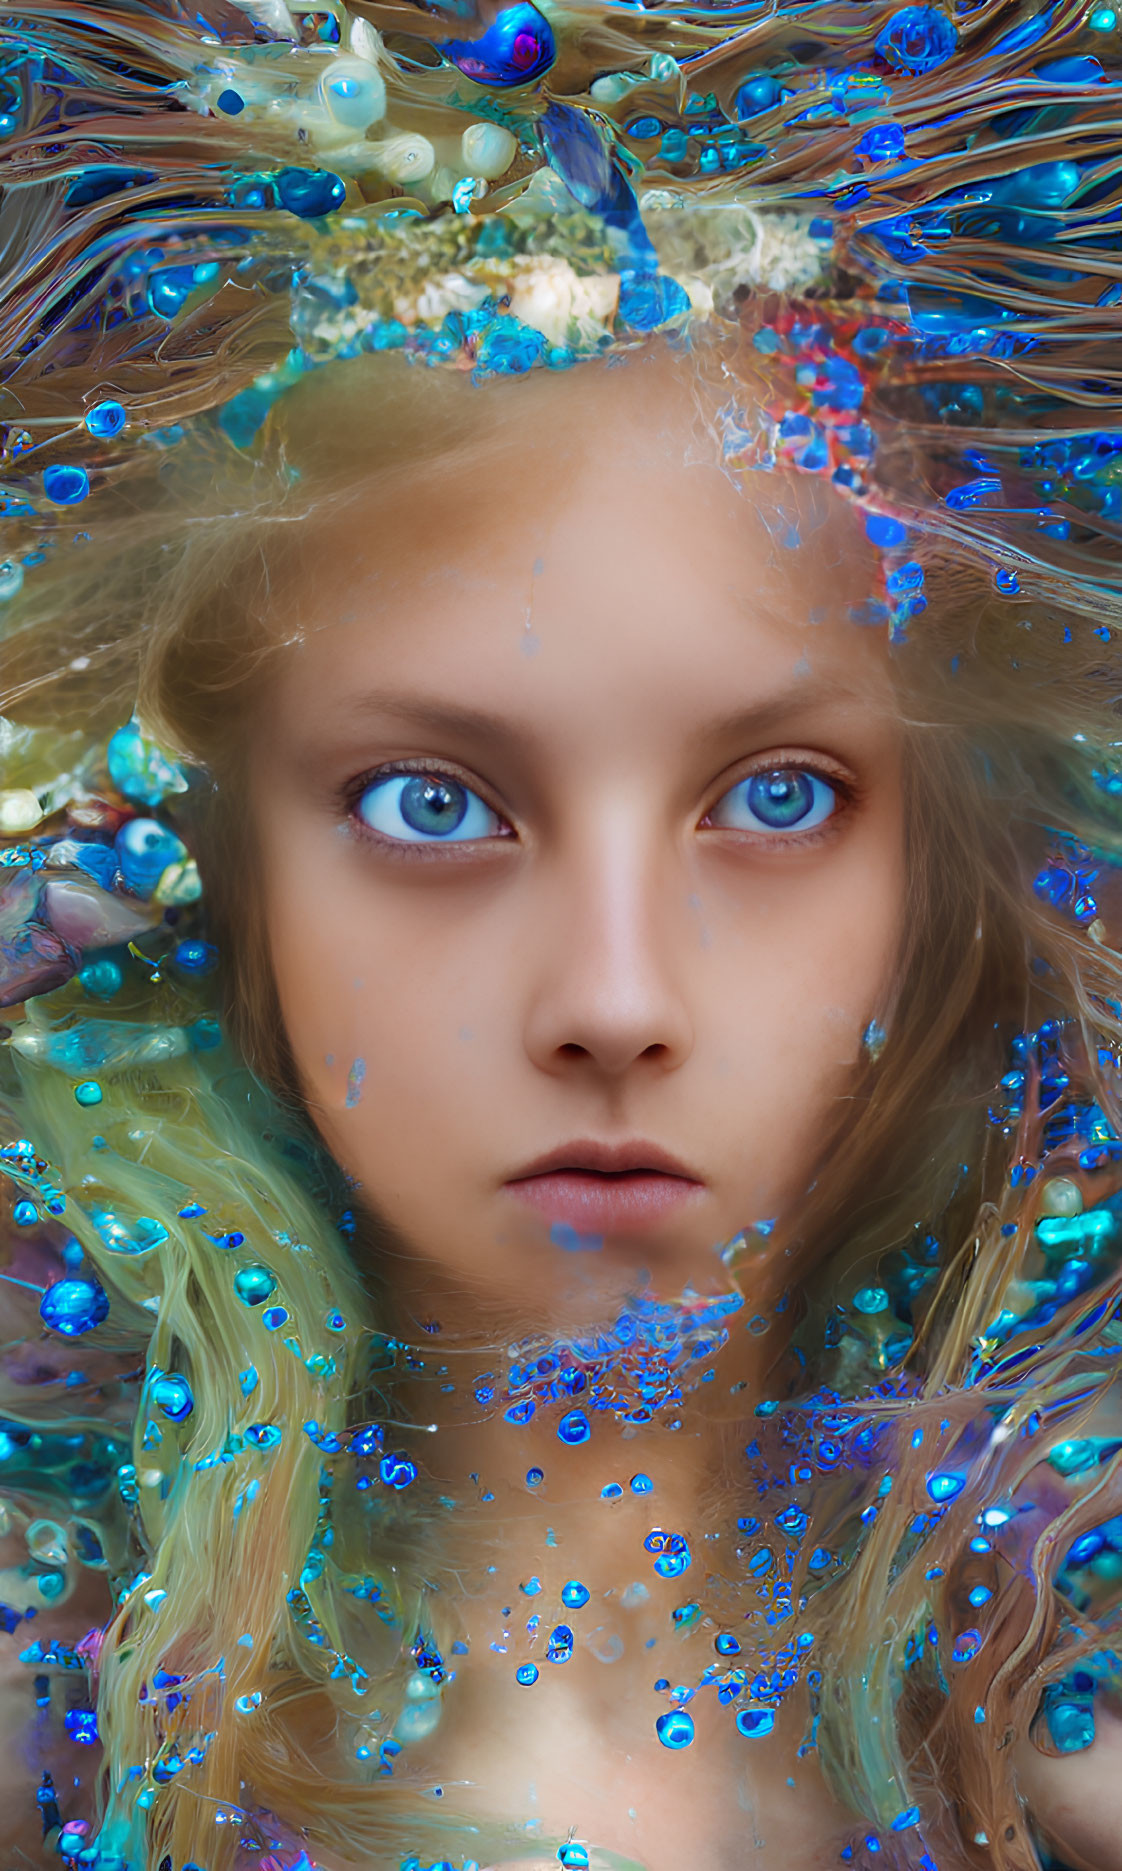 Surreal portrait of young girl with blue eyes in swirling blue and gold hues